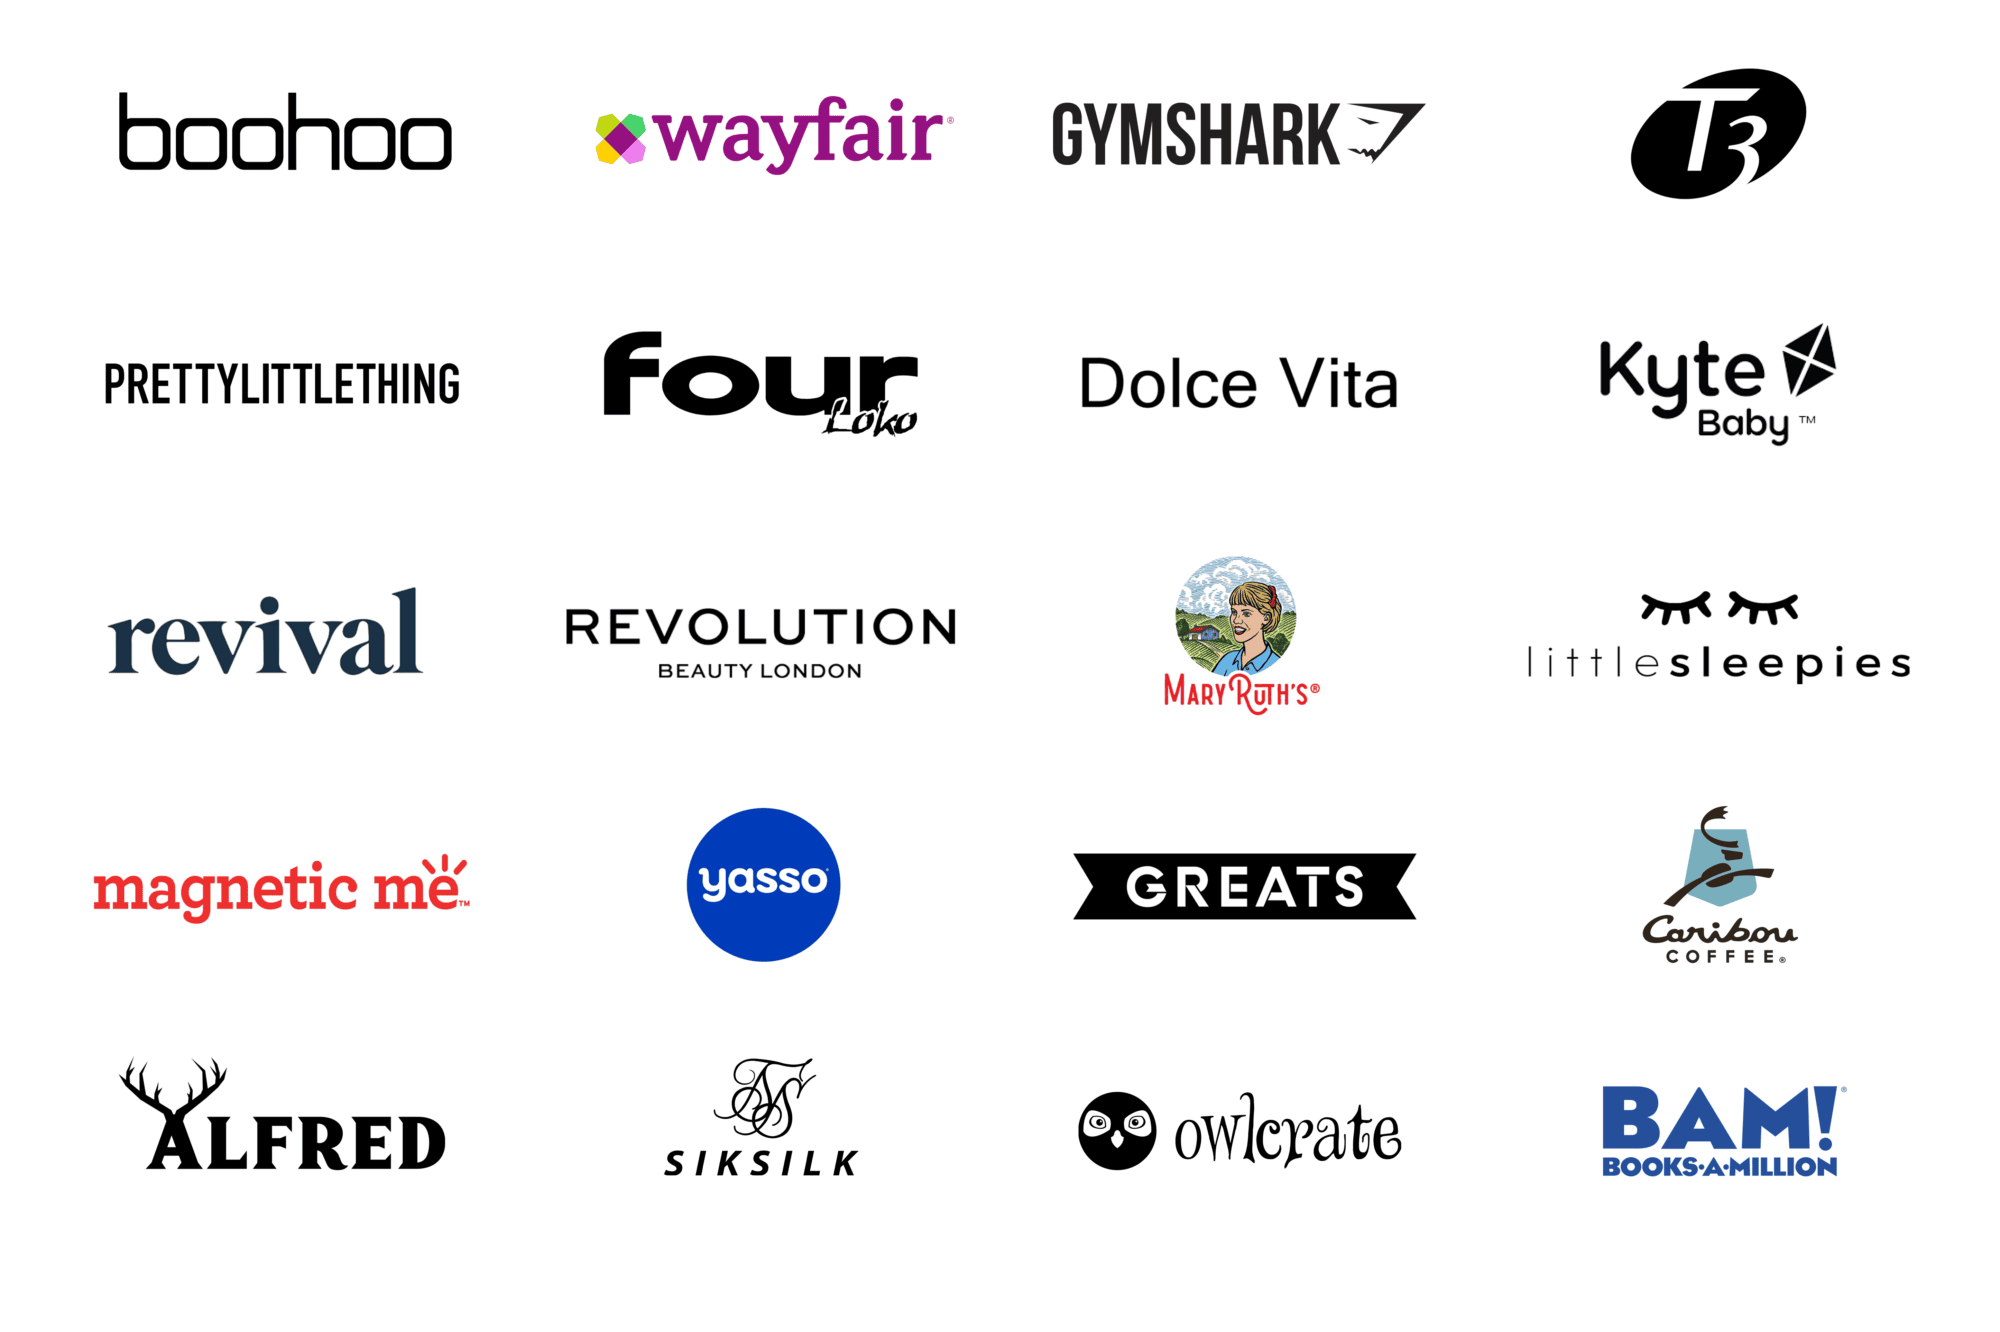 LoudCrowd partners with the world's top brands like boohoo, Wayfair, Gymshark, and Revolution Beauty